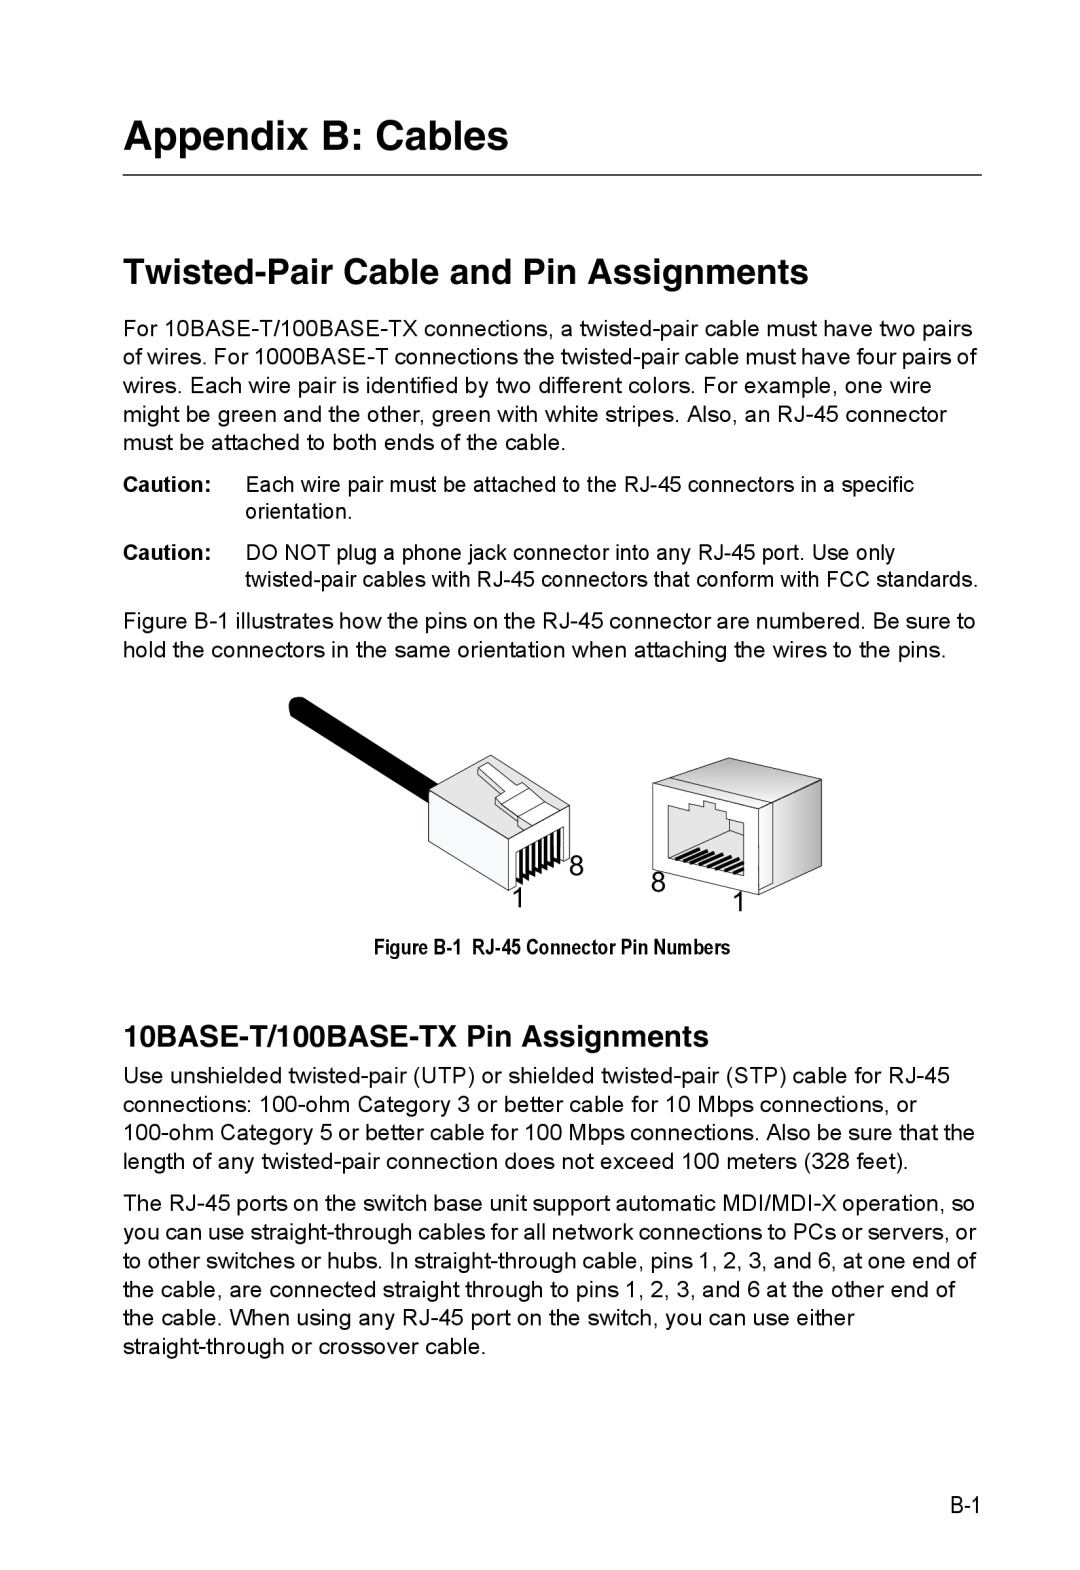 Accton Technology ES4324 Appendix B Cables, Twisted-Pair Cable and Pin Assignments, 10BASE-T/100BASE-TX Pin Assignments 